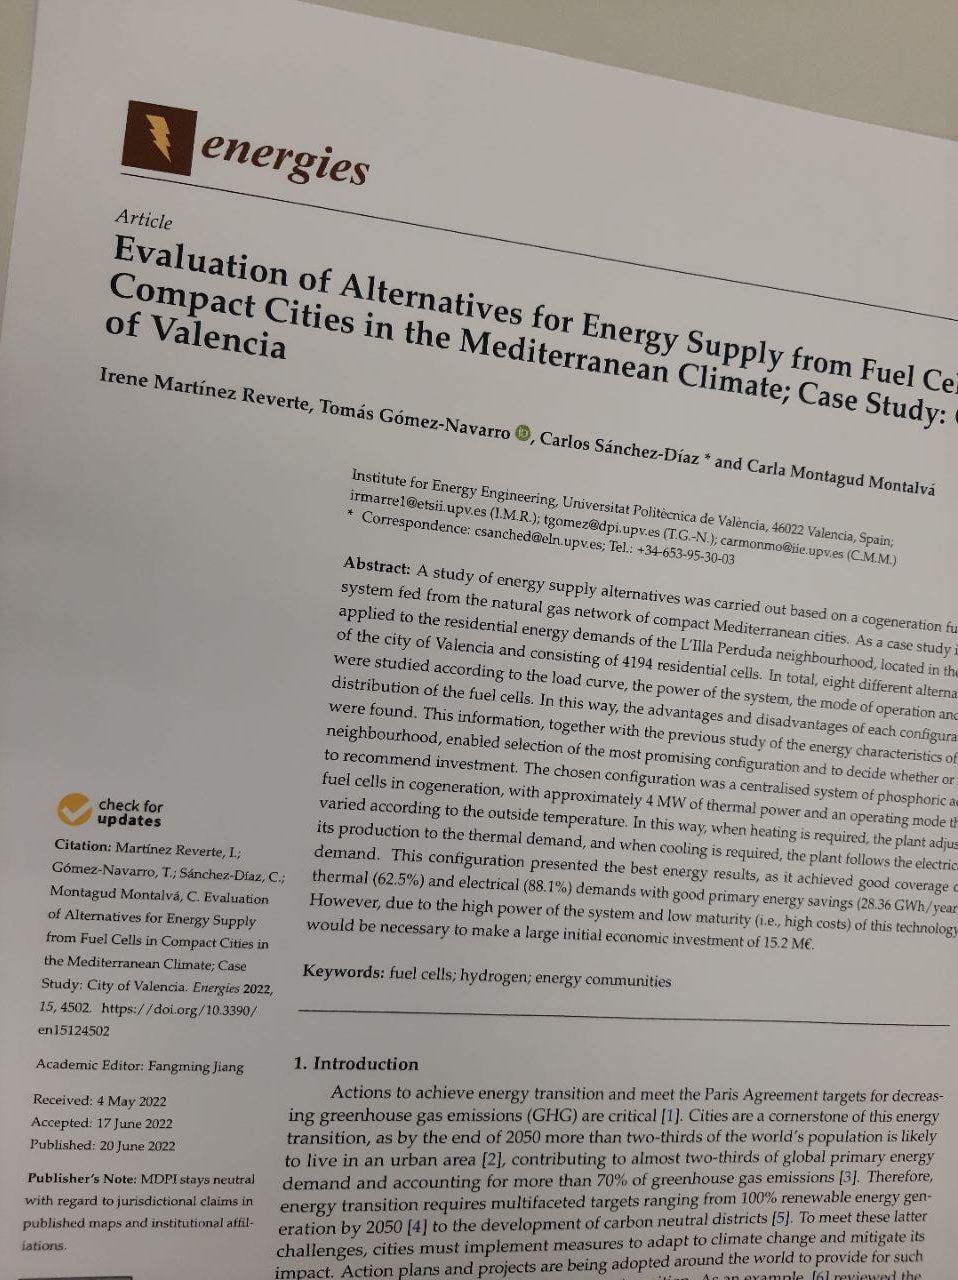 Evaluation of alternatives for energy supply from fuel cells in compact cities in the Mediterranean climate; Case study: City of Valencia